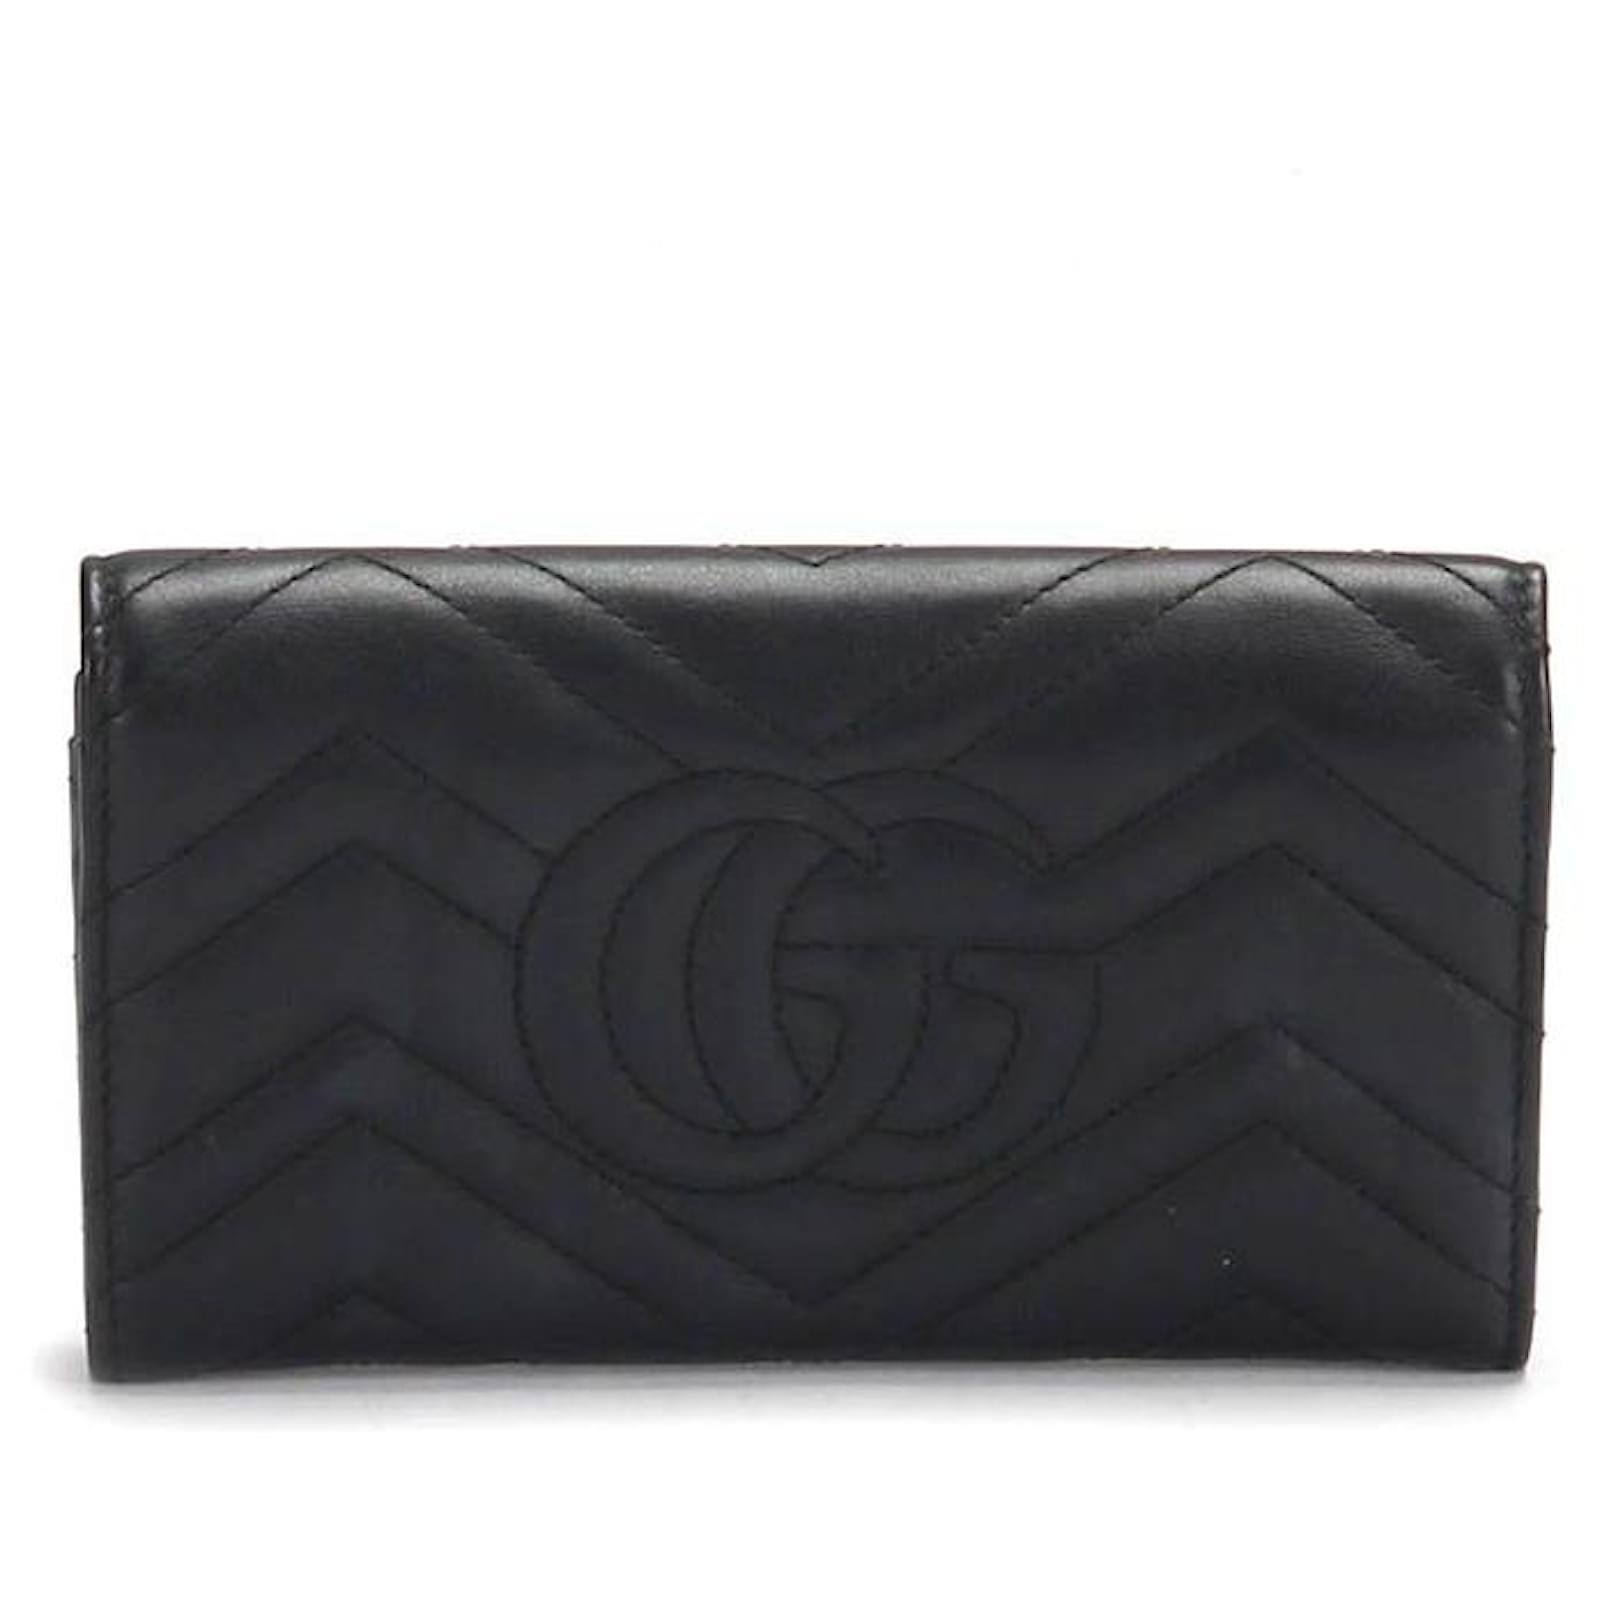 Gucci GG Marmont Continental Wallet in black calf leather leather ref ...